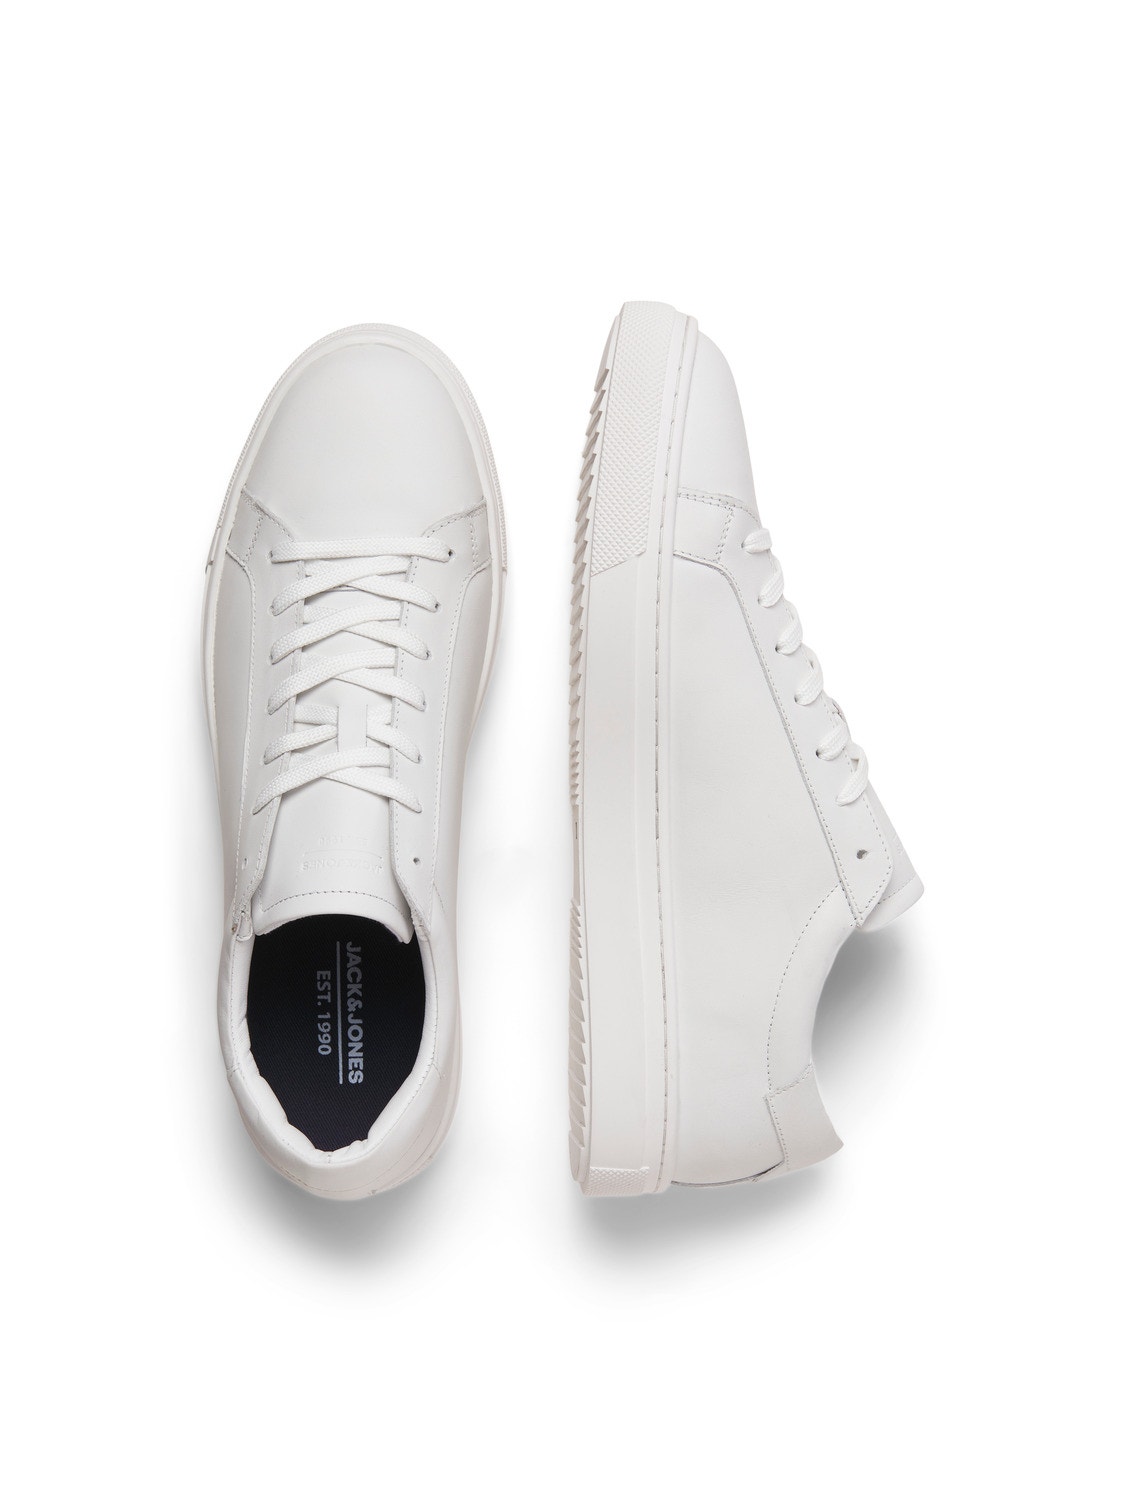 Jack & Jones casual sneakers in white and navy